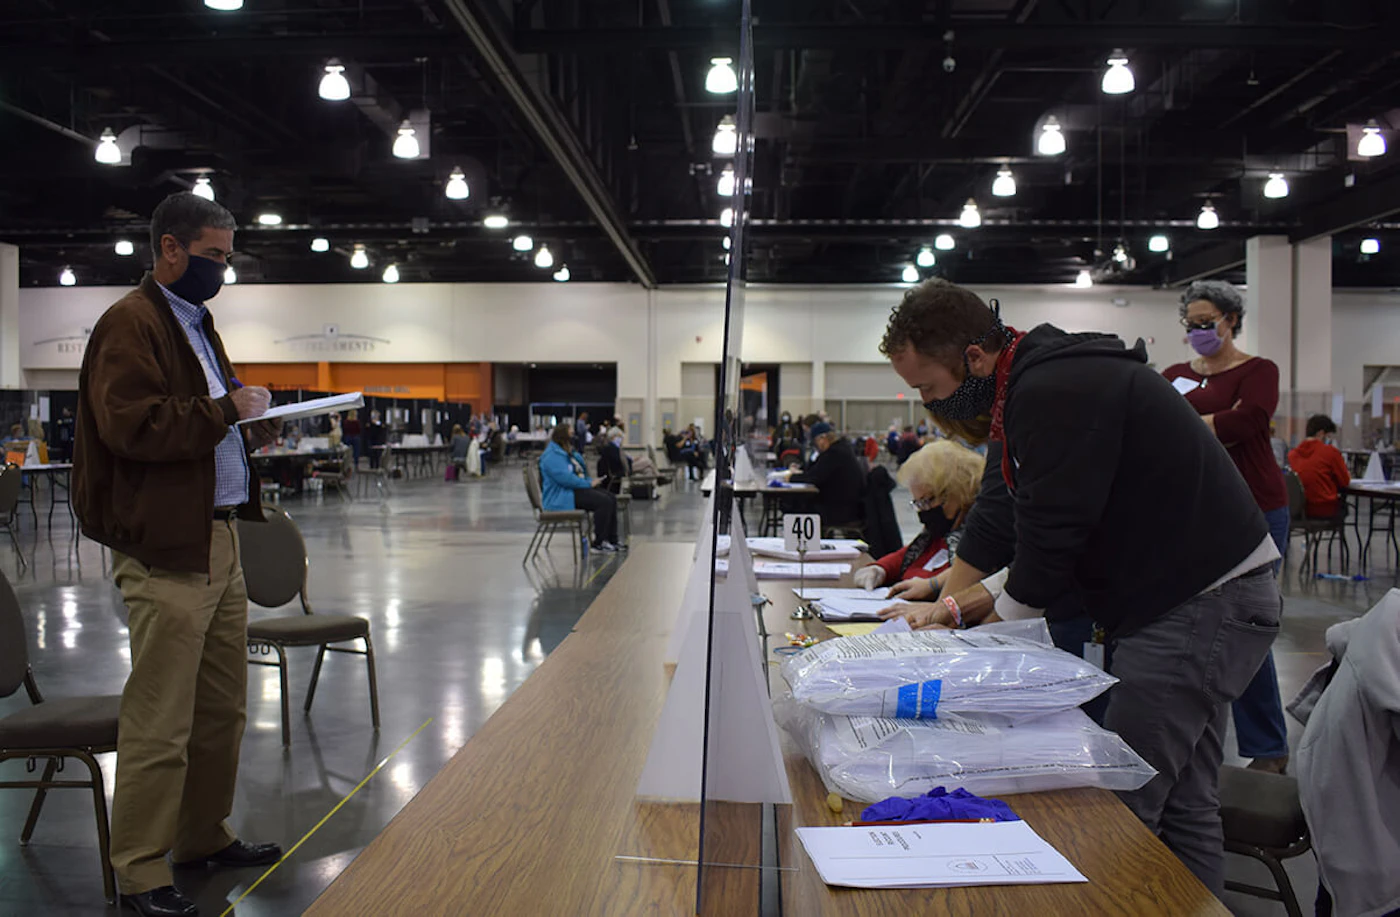 At left, Bill Bridge, a Trump-supporting recount observer, watches election officials work last November at the Wisconsin Center in Milwaukee. The 2020 presidential election has repeatedly been shown to have been secure and accurate despite numerous recounts, challenges, and ongoing baseless claims.(Photo by Jonathon Sadowski)